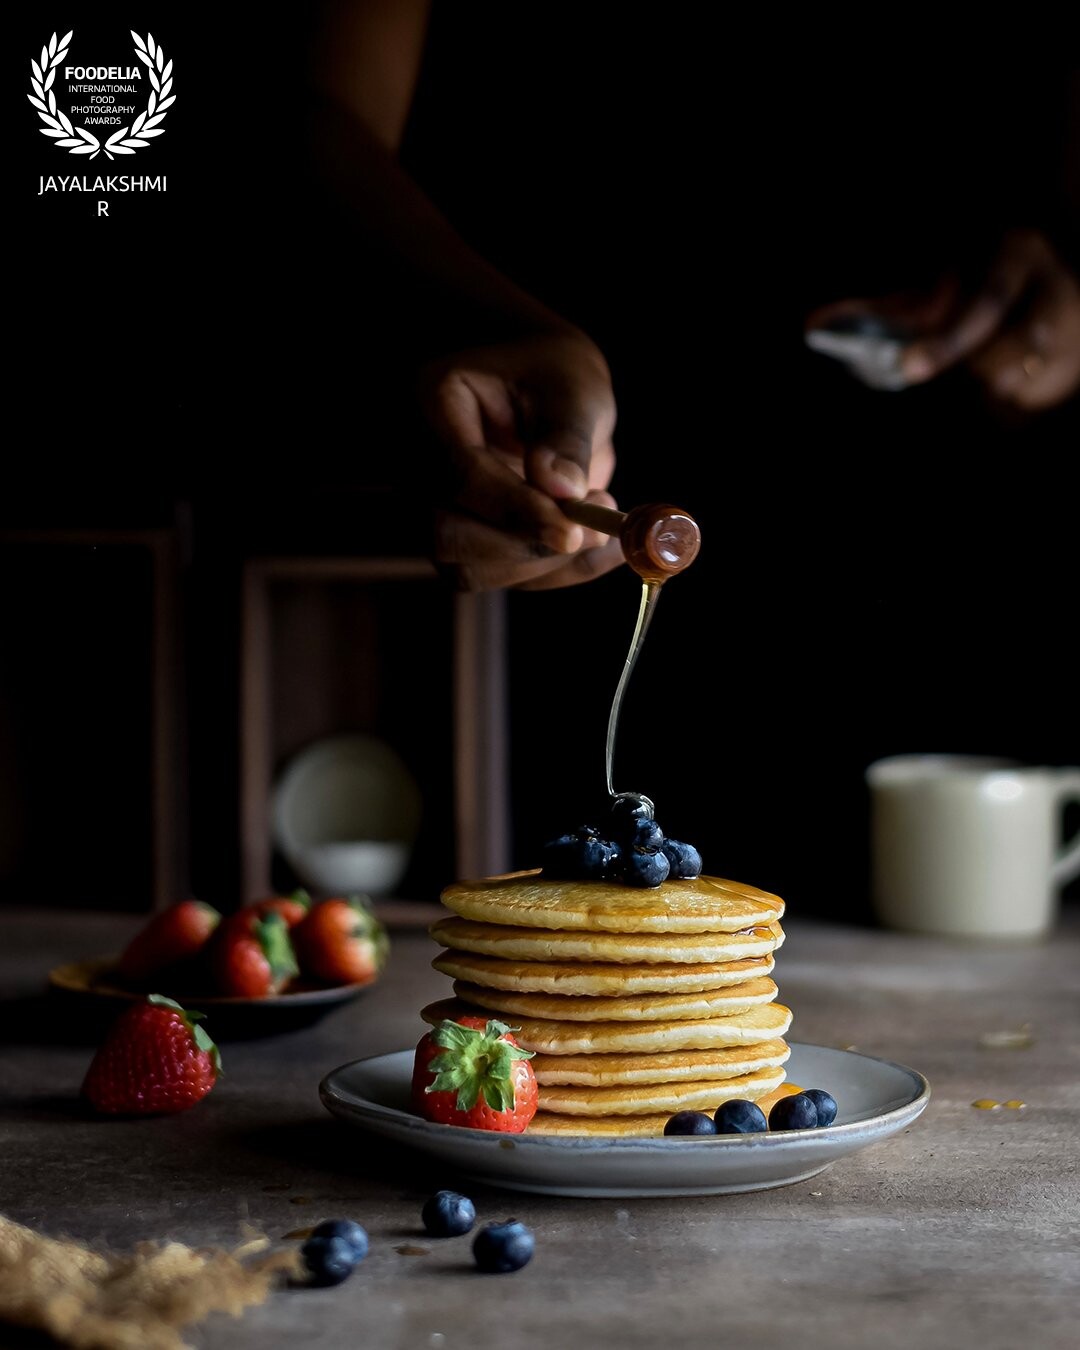 A typical breakfast scene. A stack of blueberry pancakes with a drizzle of maple syrup, loaded with fresh berries. Shot against a window in natural light.